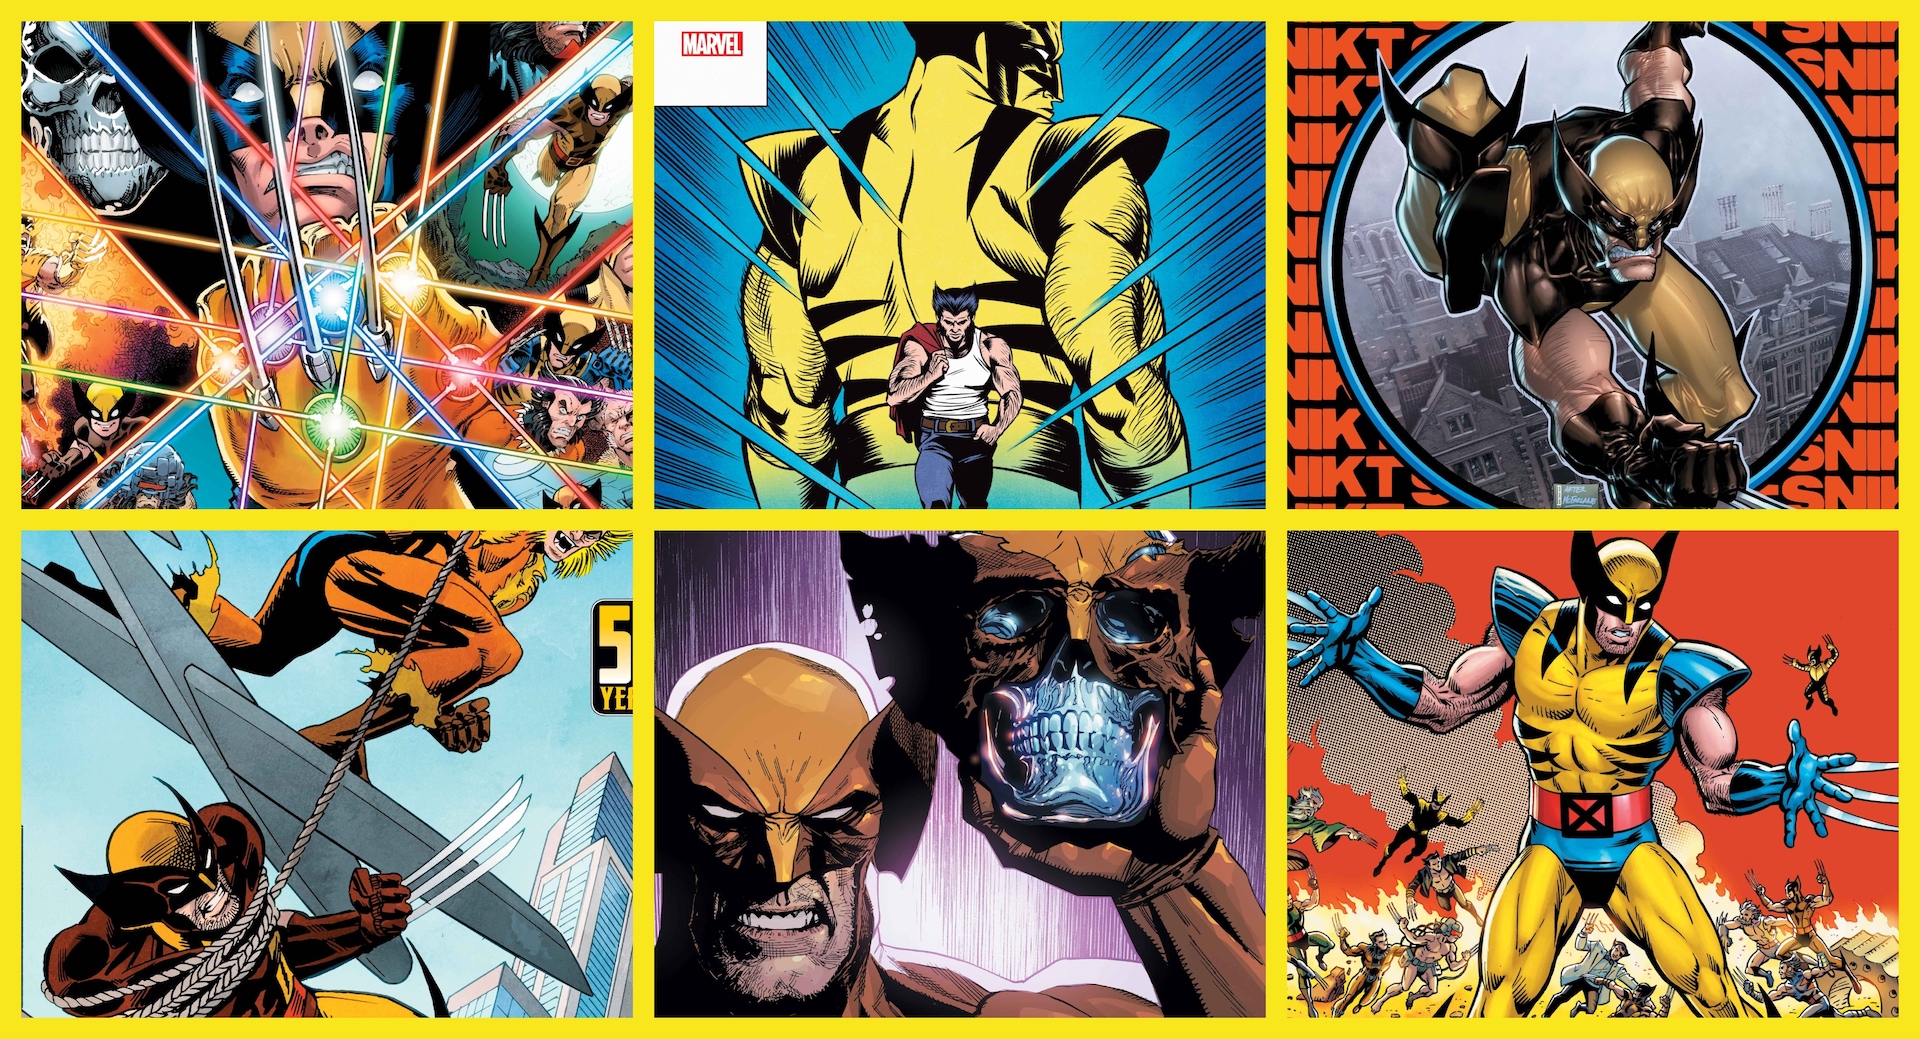 Witness Wolverine depicted in iconic Marvel scenes via January 2024 covers